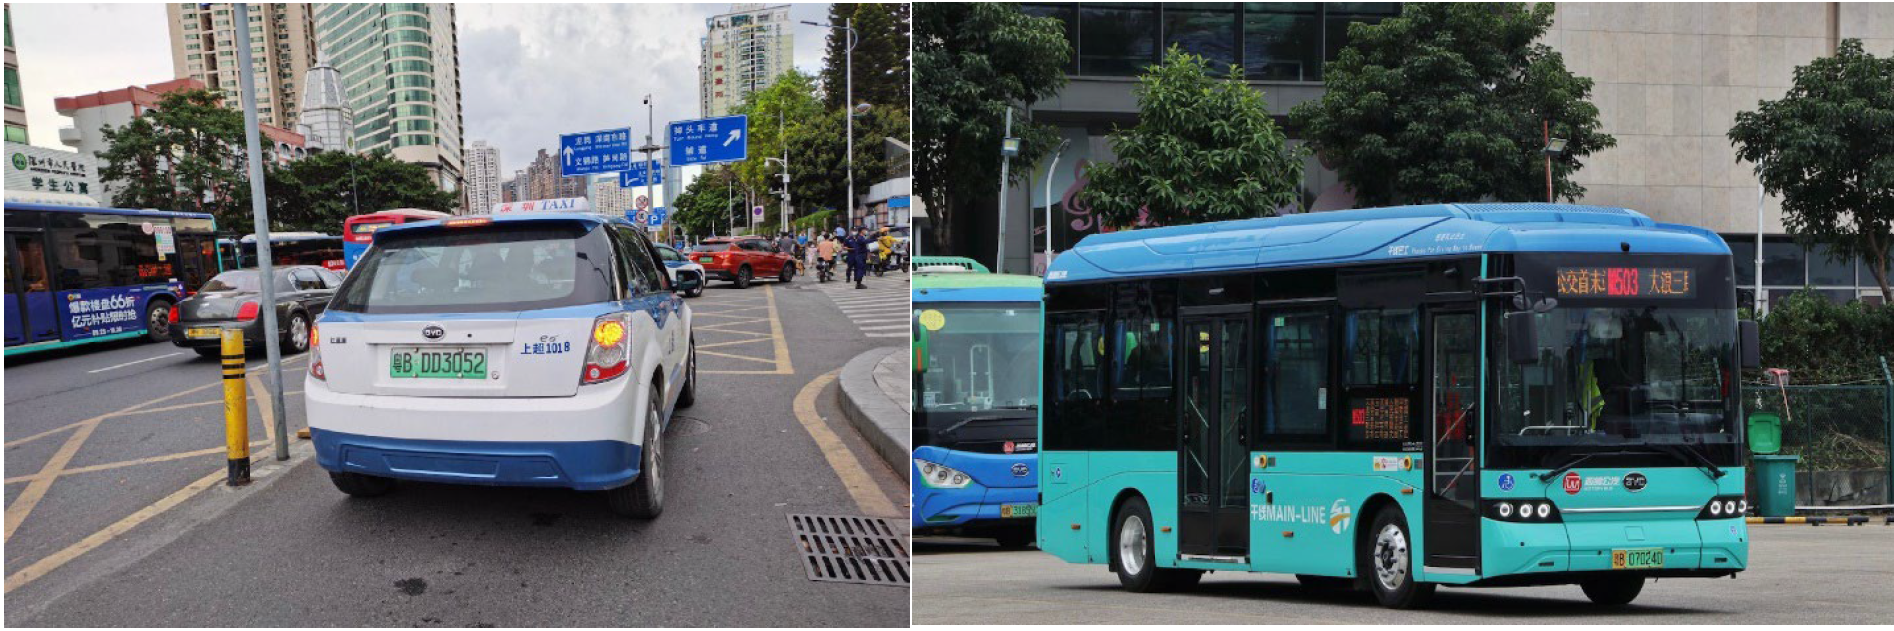 Most taxis in Shenzhen were EVs predominantly supplied by automaker BYD. The city’s buses were also mostly EVs.